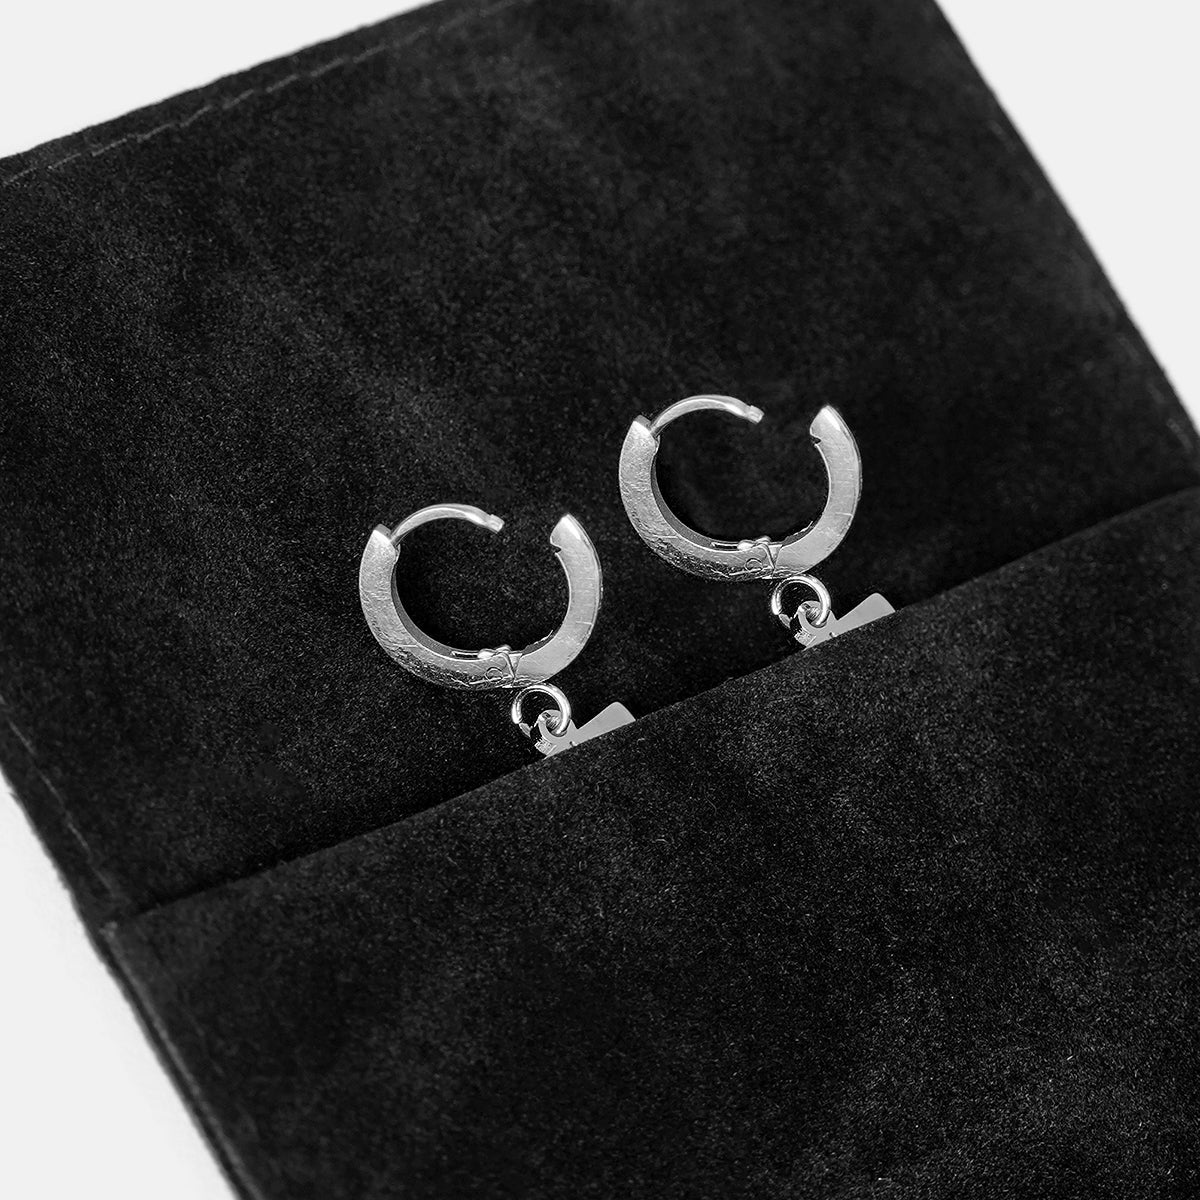 51 Number Earring - Stainless Steel